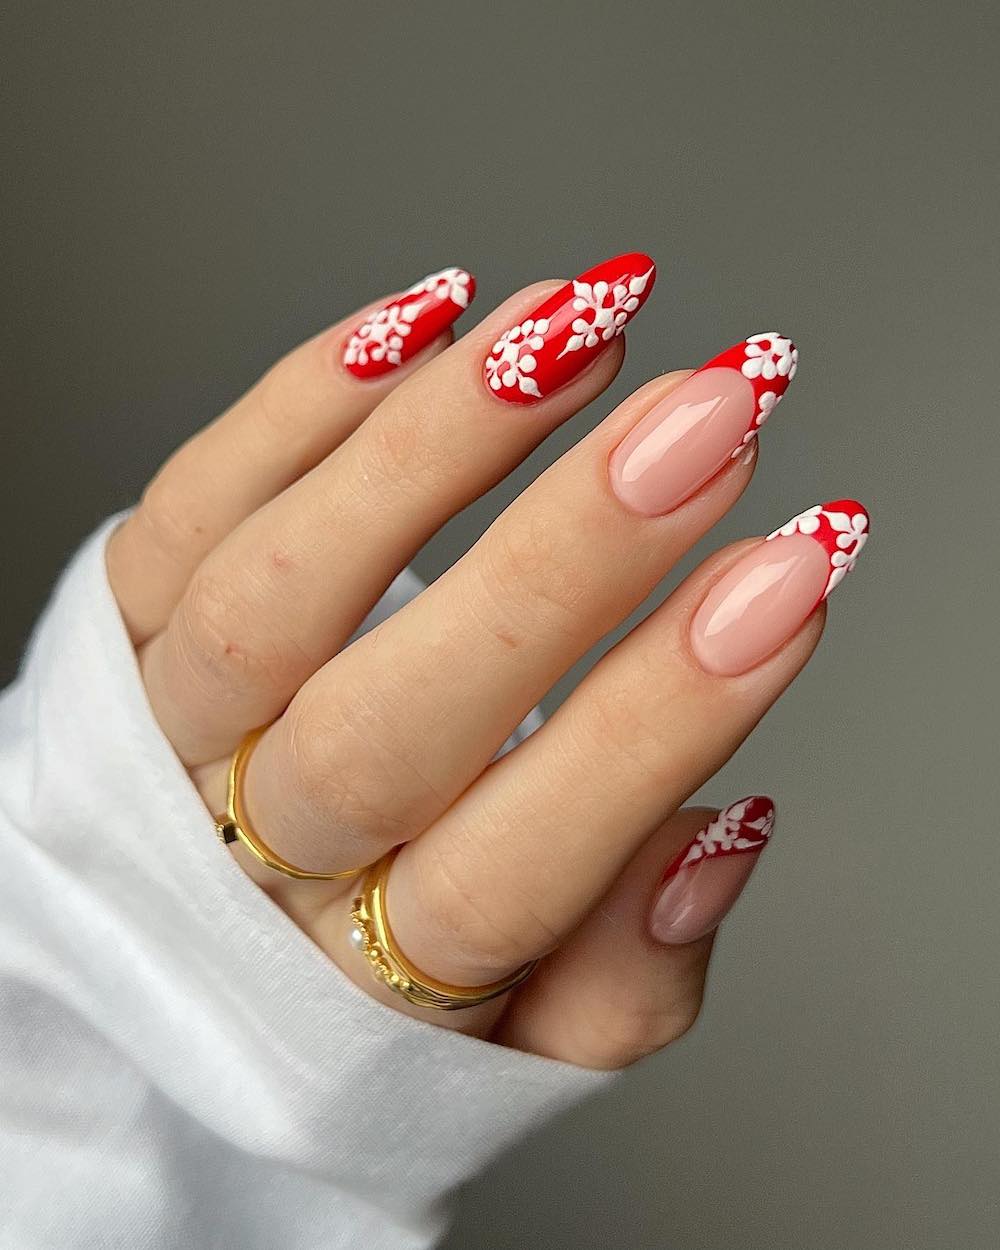 A hand with medium length almond nails painted with a combination of solid red nails and red French tips and accented with white snowflakes